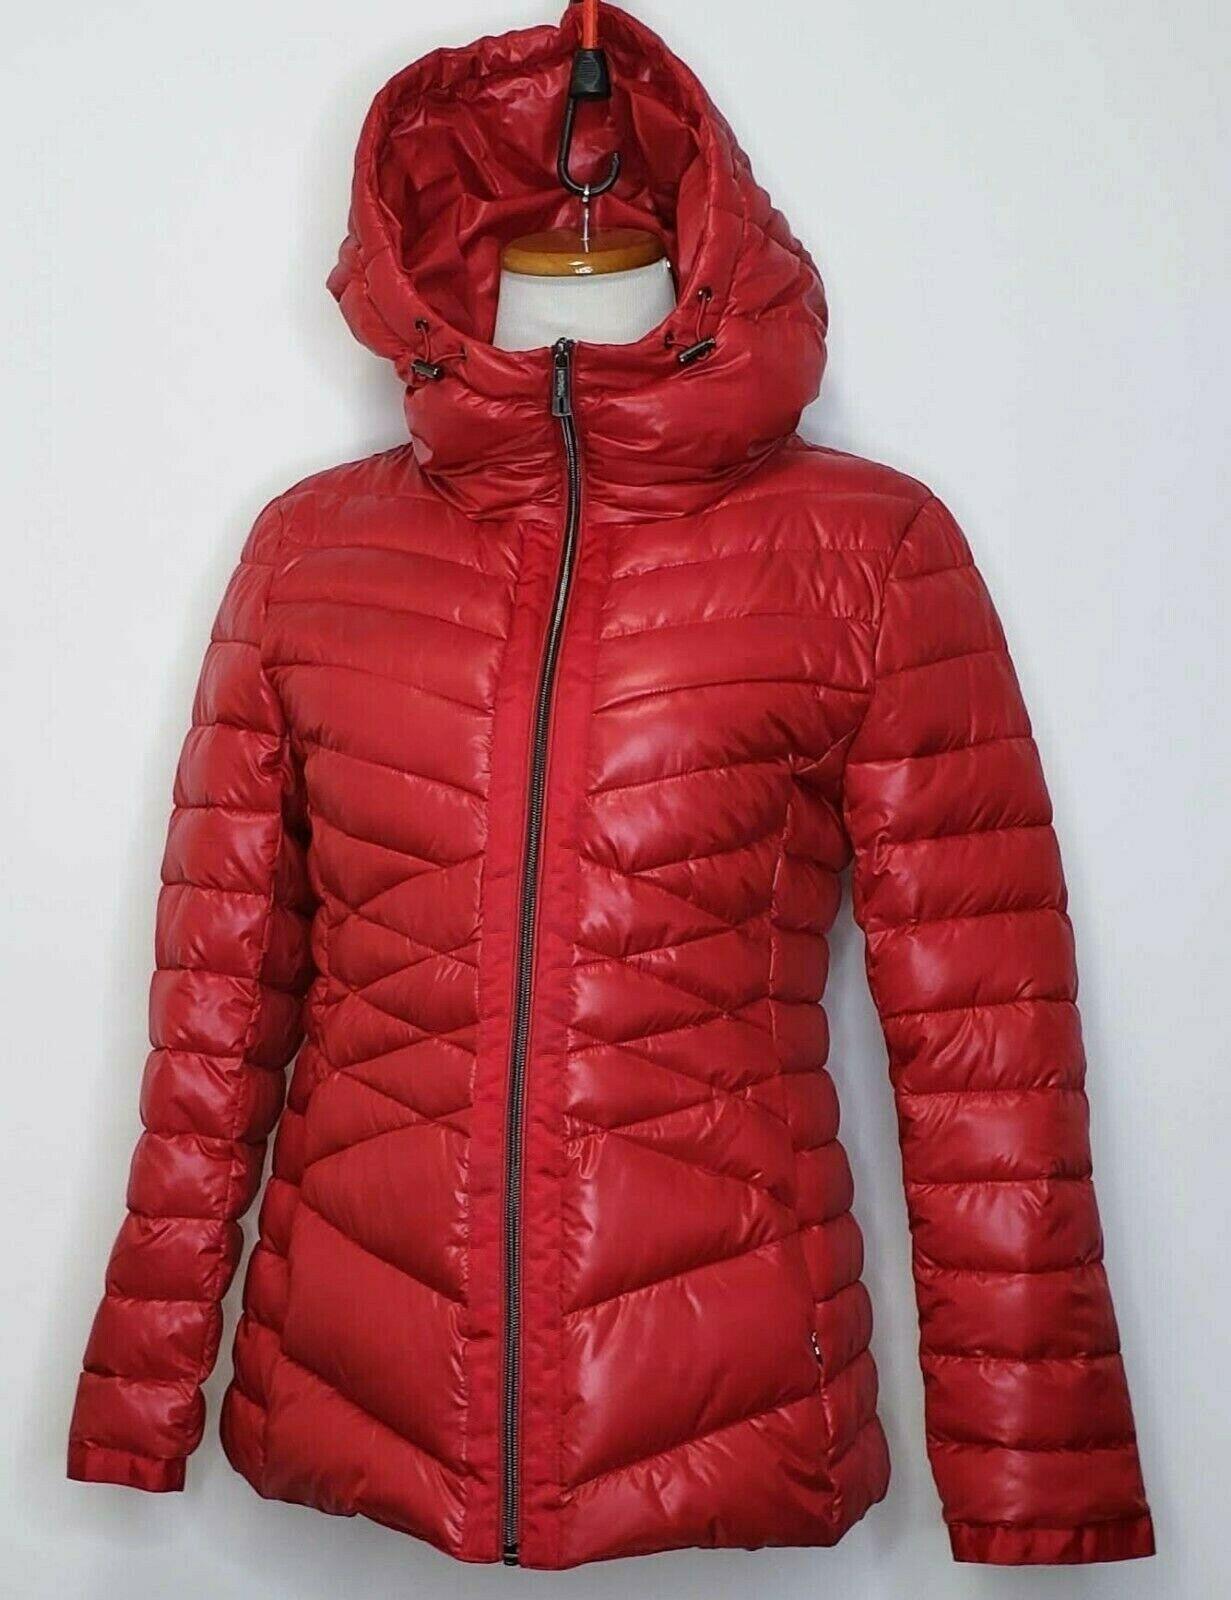 KENNETH COLE REACTION Women's Red Quilted Puffer Hooded Jacket Size S - SVNYFancy